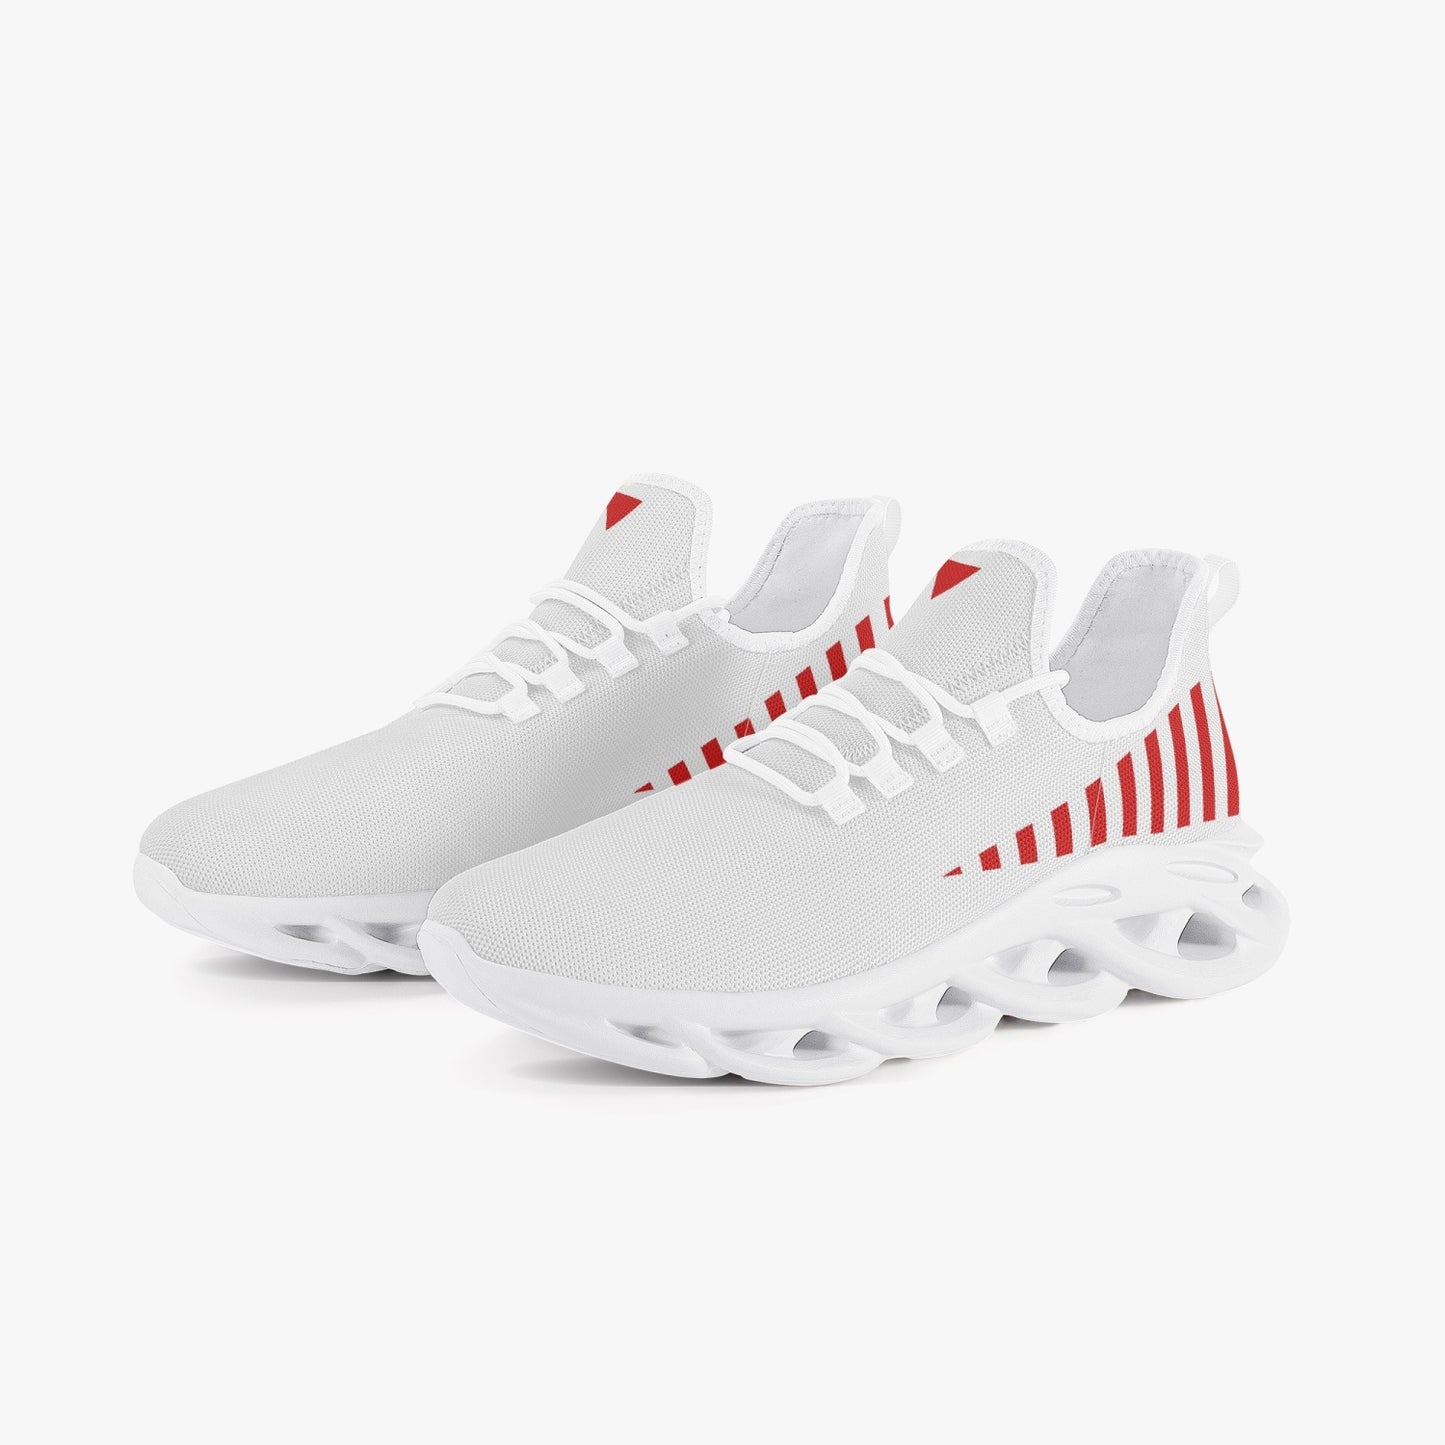 Vluxe Bounce Mesh Knit Sneakers - White/Red